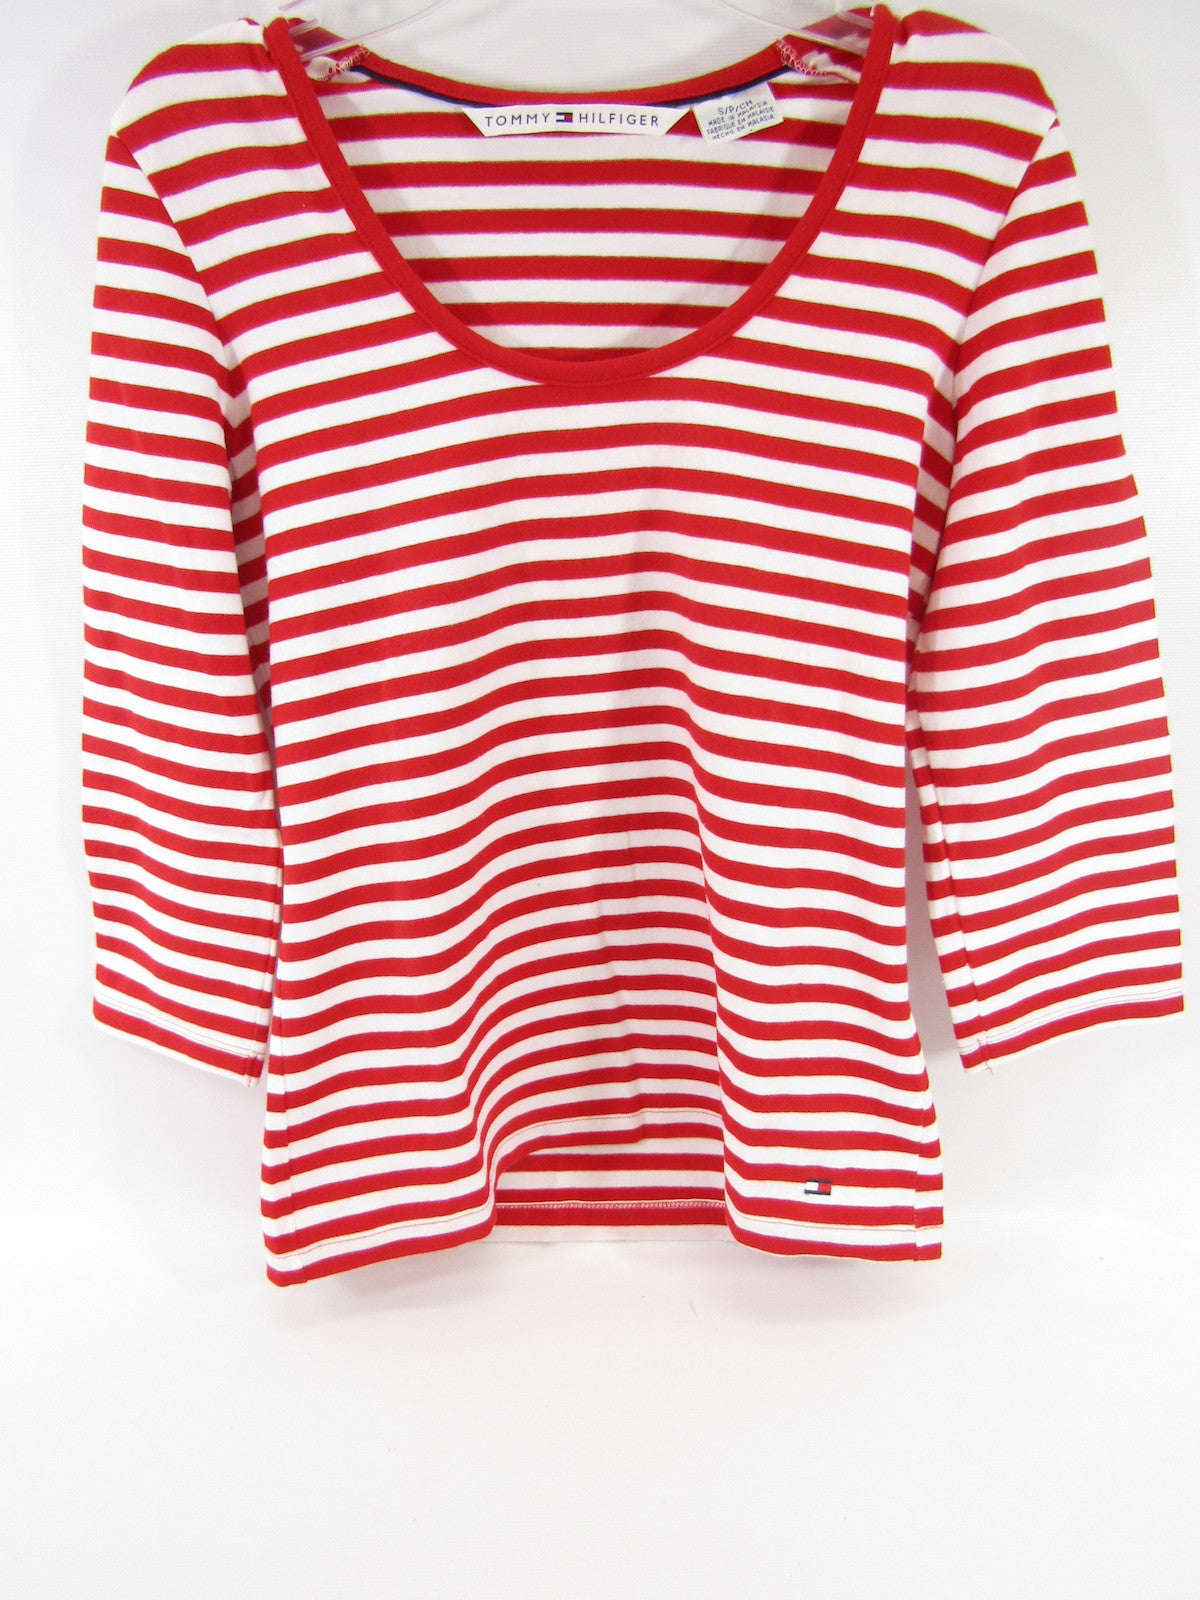 tommy hilfiger red and white striped shirt